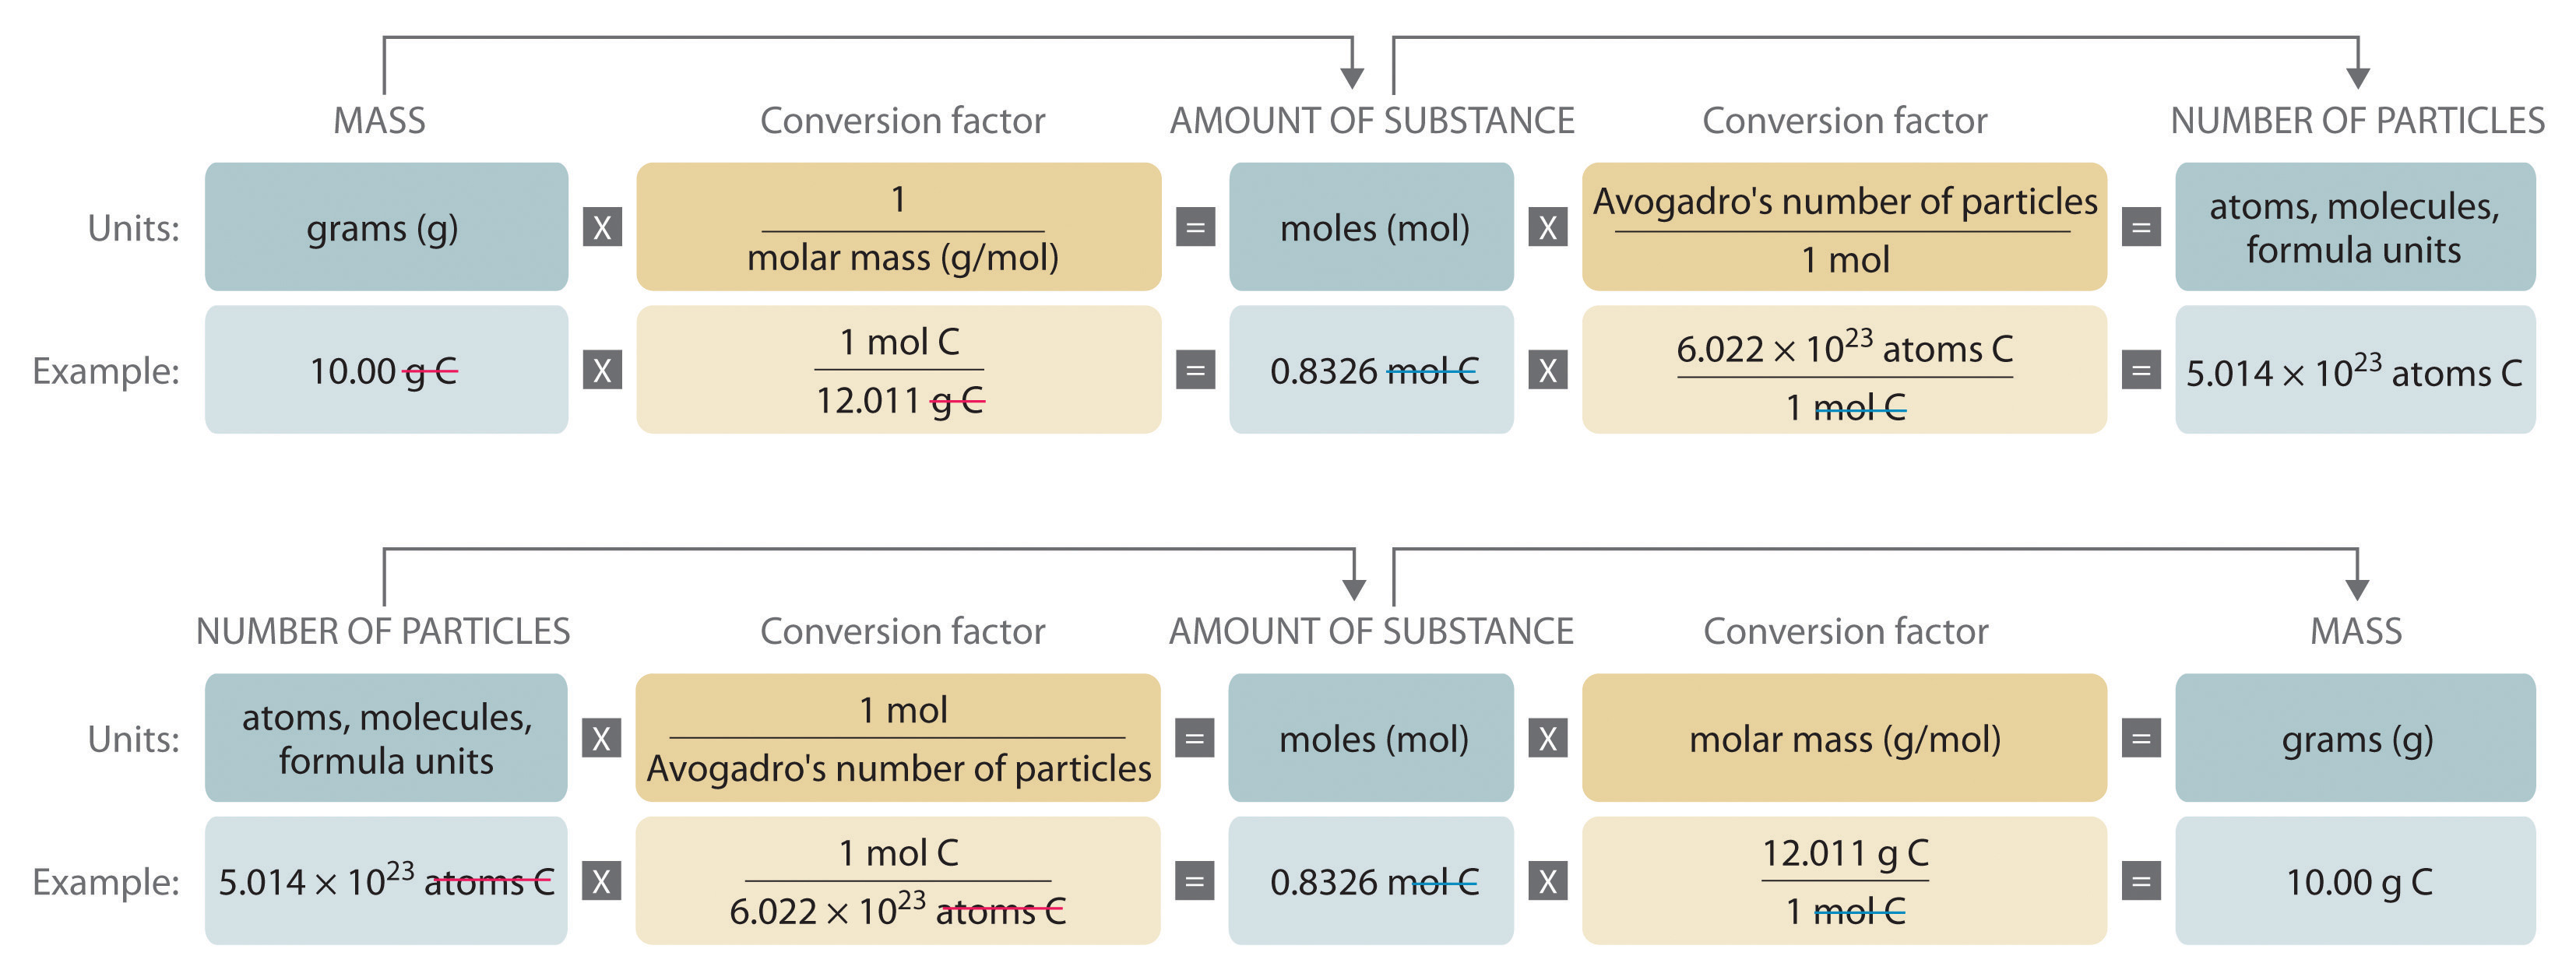 To convert from mass to number of particles, mass is multipled by (1/molar mass) to get the number of moles which is then multiplied by Avogadro's number. To convert number of particles to mass, the number of particles is multiplied by 1/Avogadro's number to get the number of moles which is then multiplied by the molar mass.